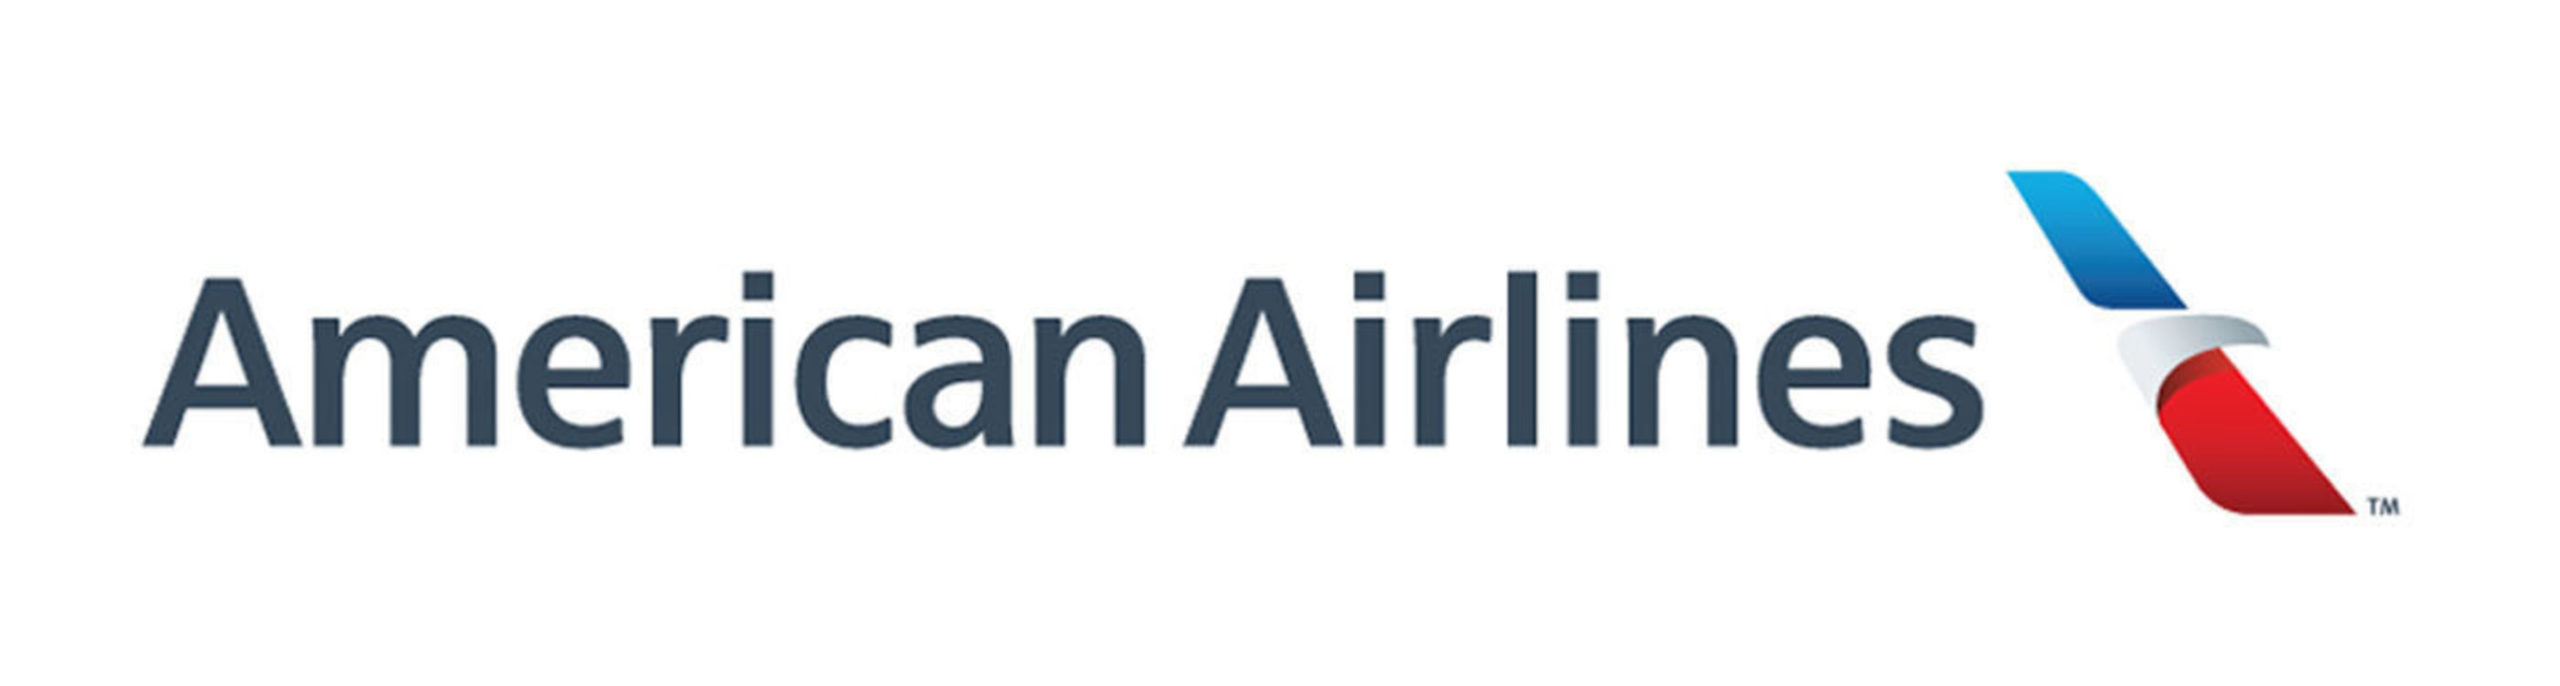 AMR CORPORATION AMERICAN AIRLINES LOGO